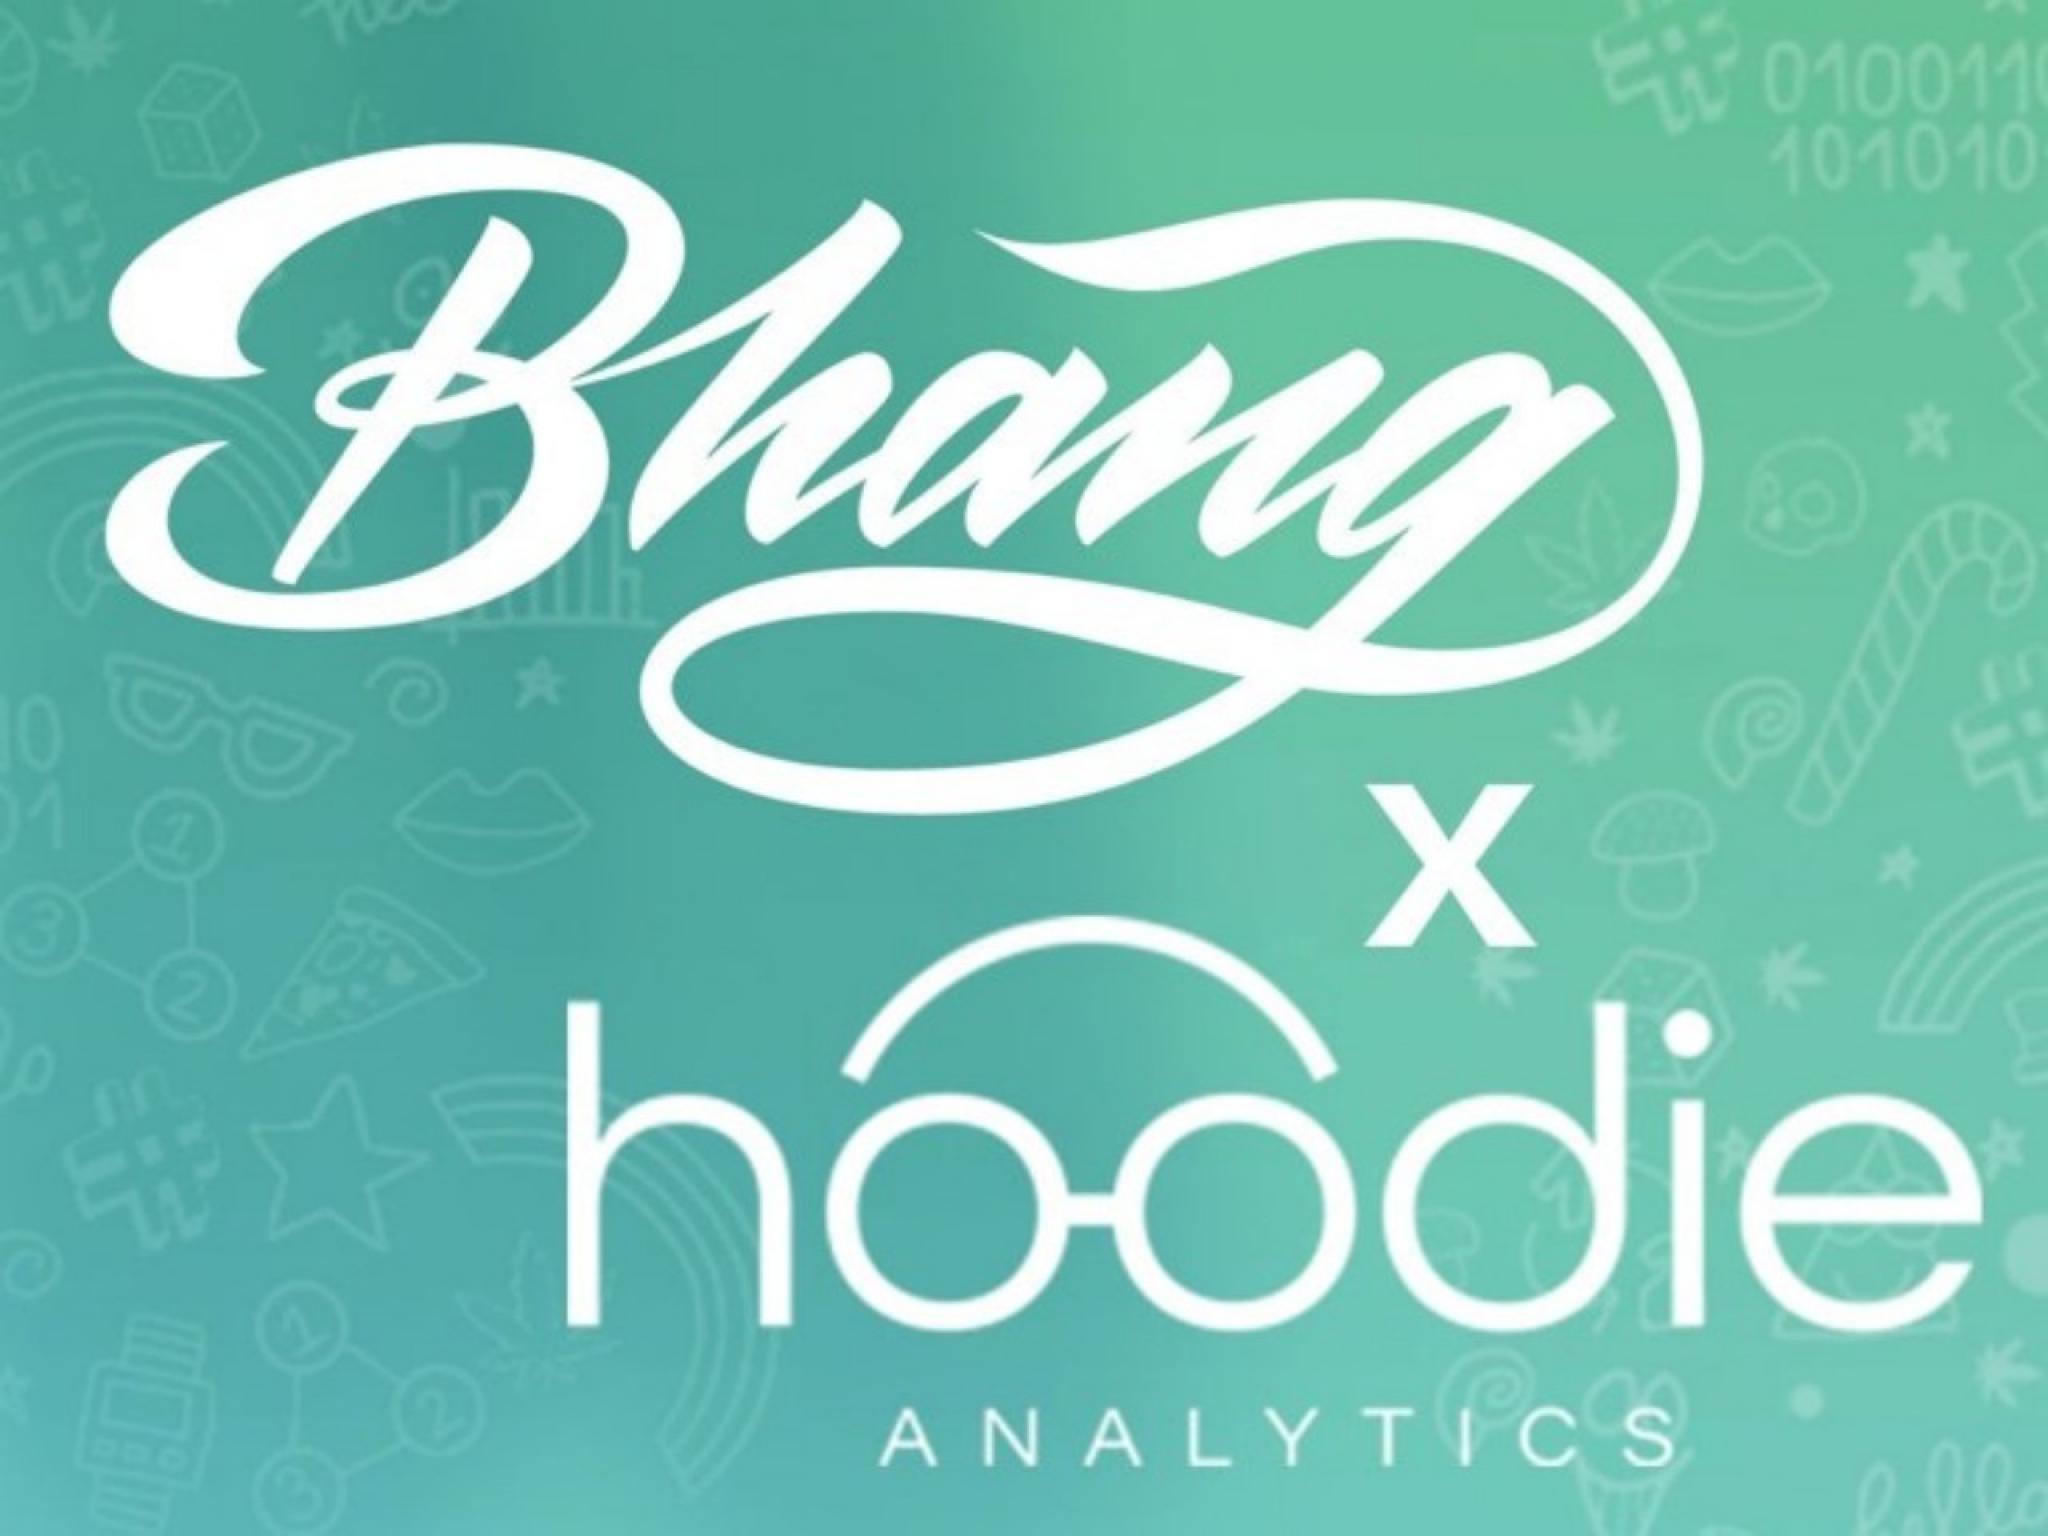  cannabis-company-bhang-partners-with-hoodie-analytics-in-a-shift-to-data-driven-decisions 